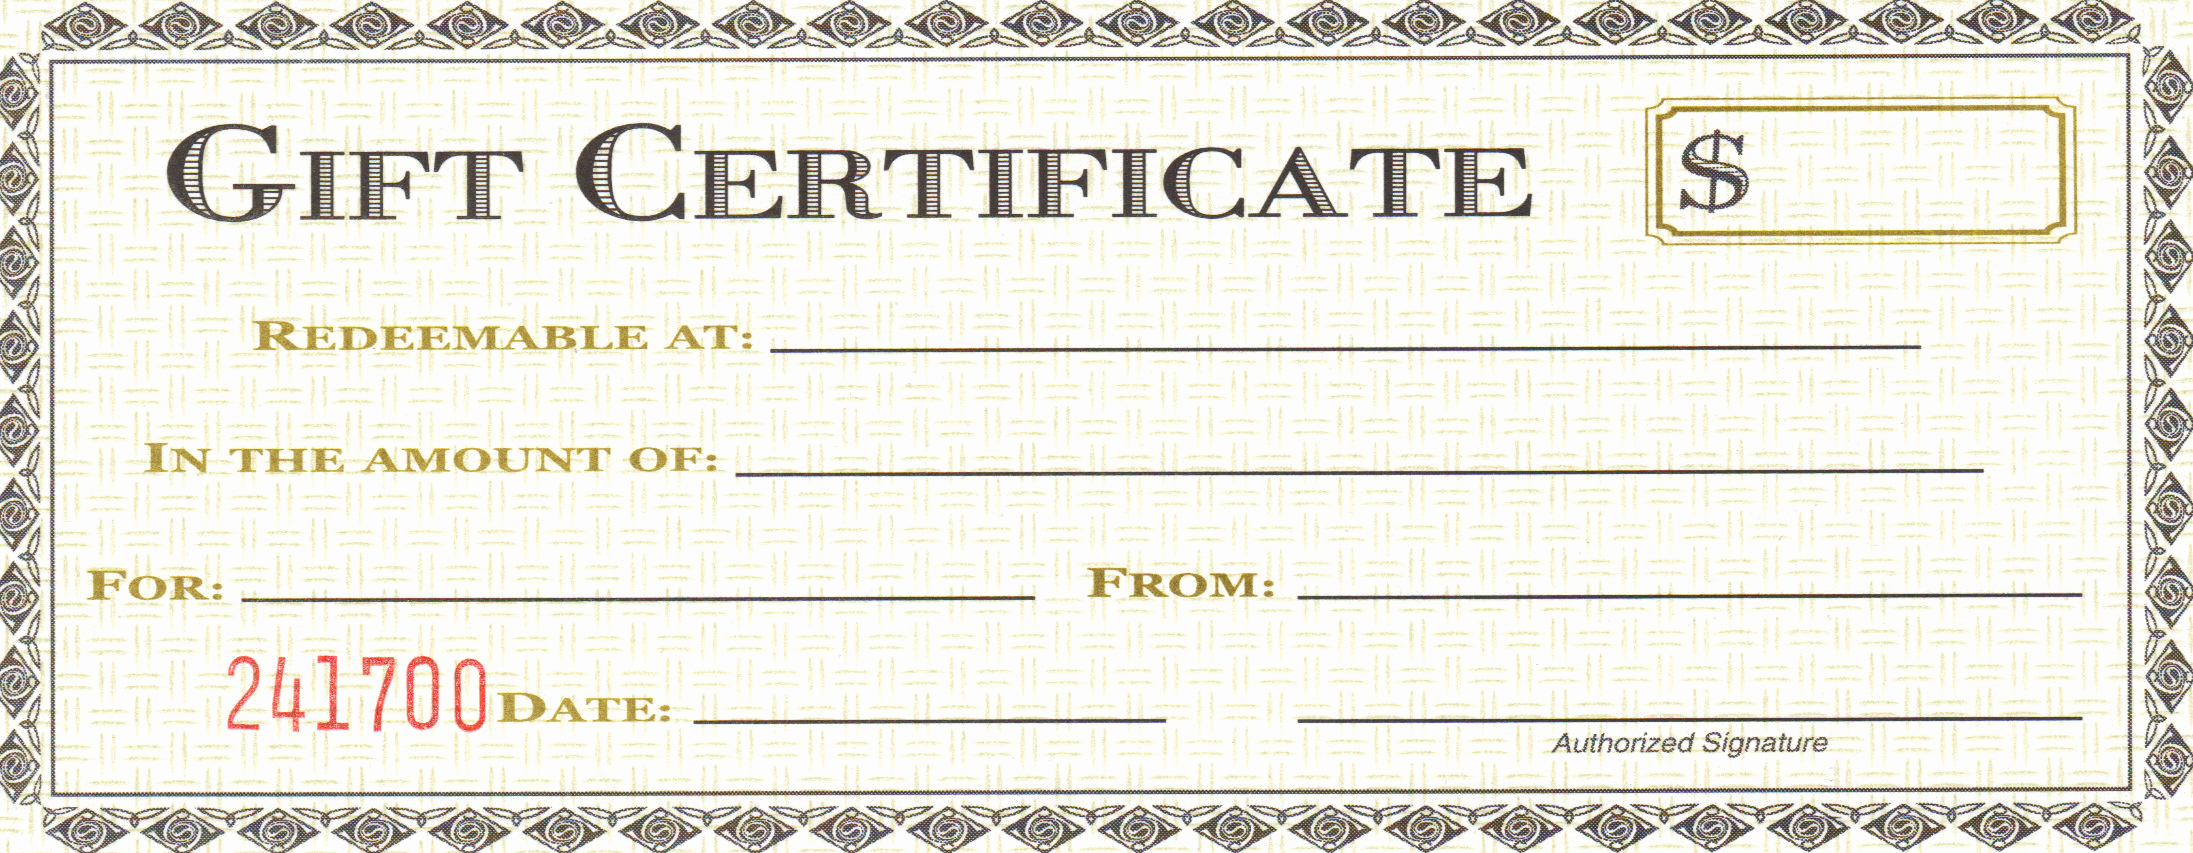 Gift Certificate Template Pages New 18 Gift Certificate Templates Excel Pdf formats